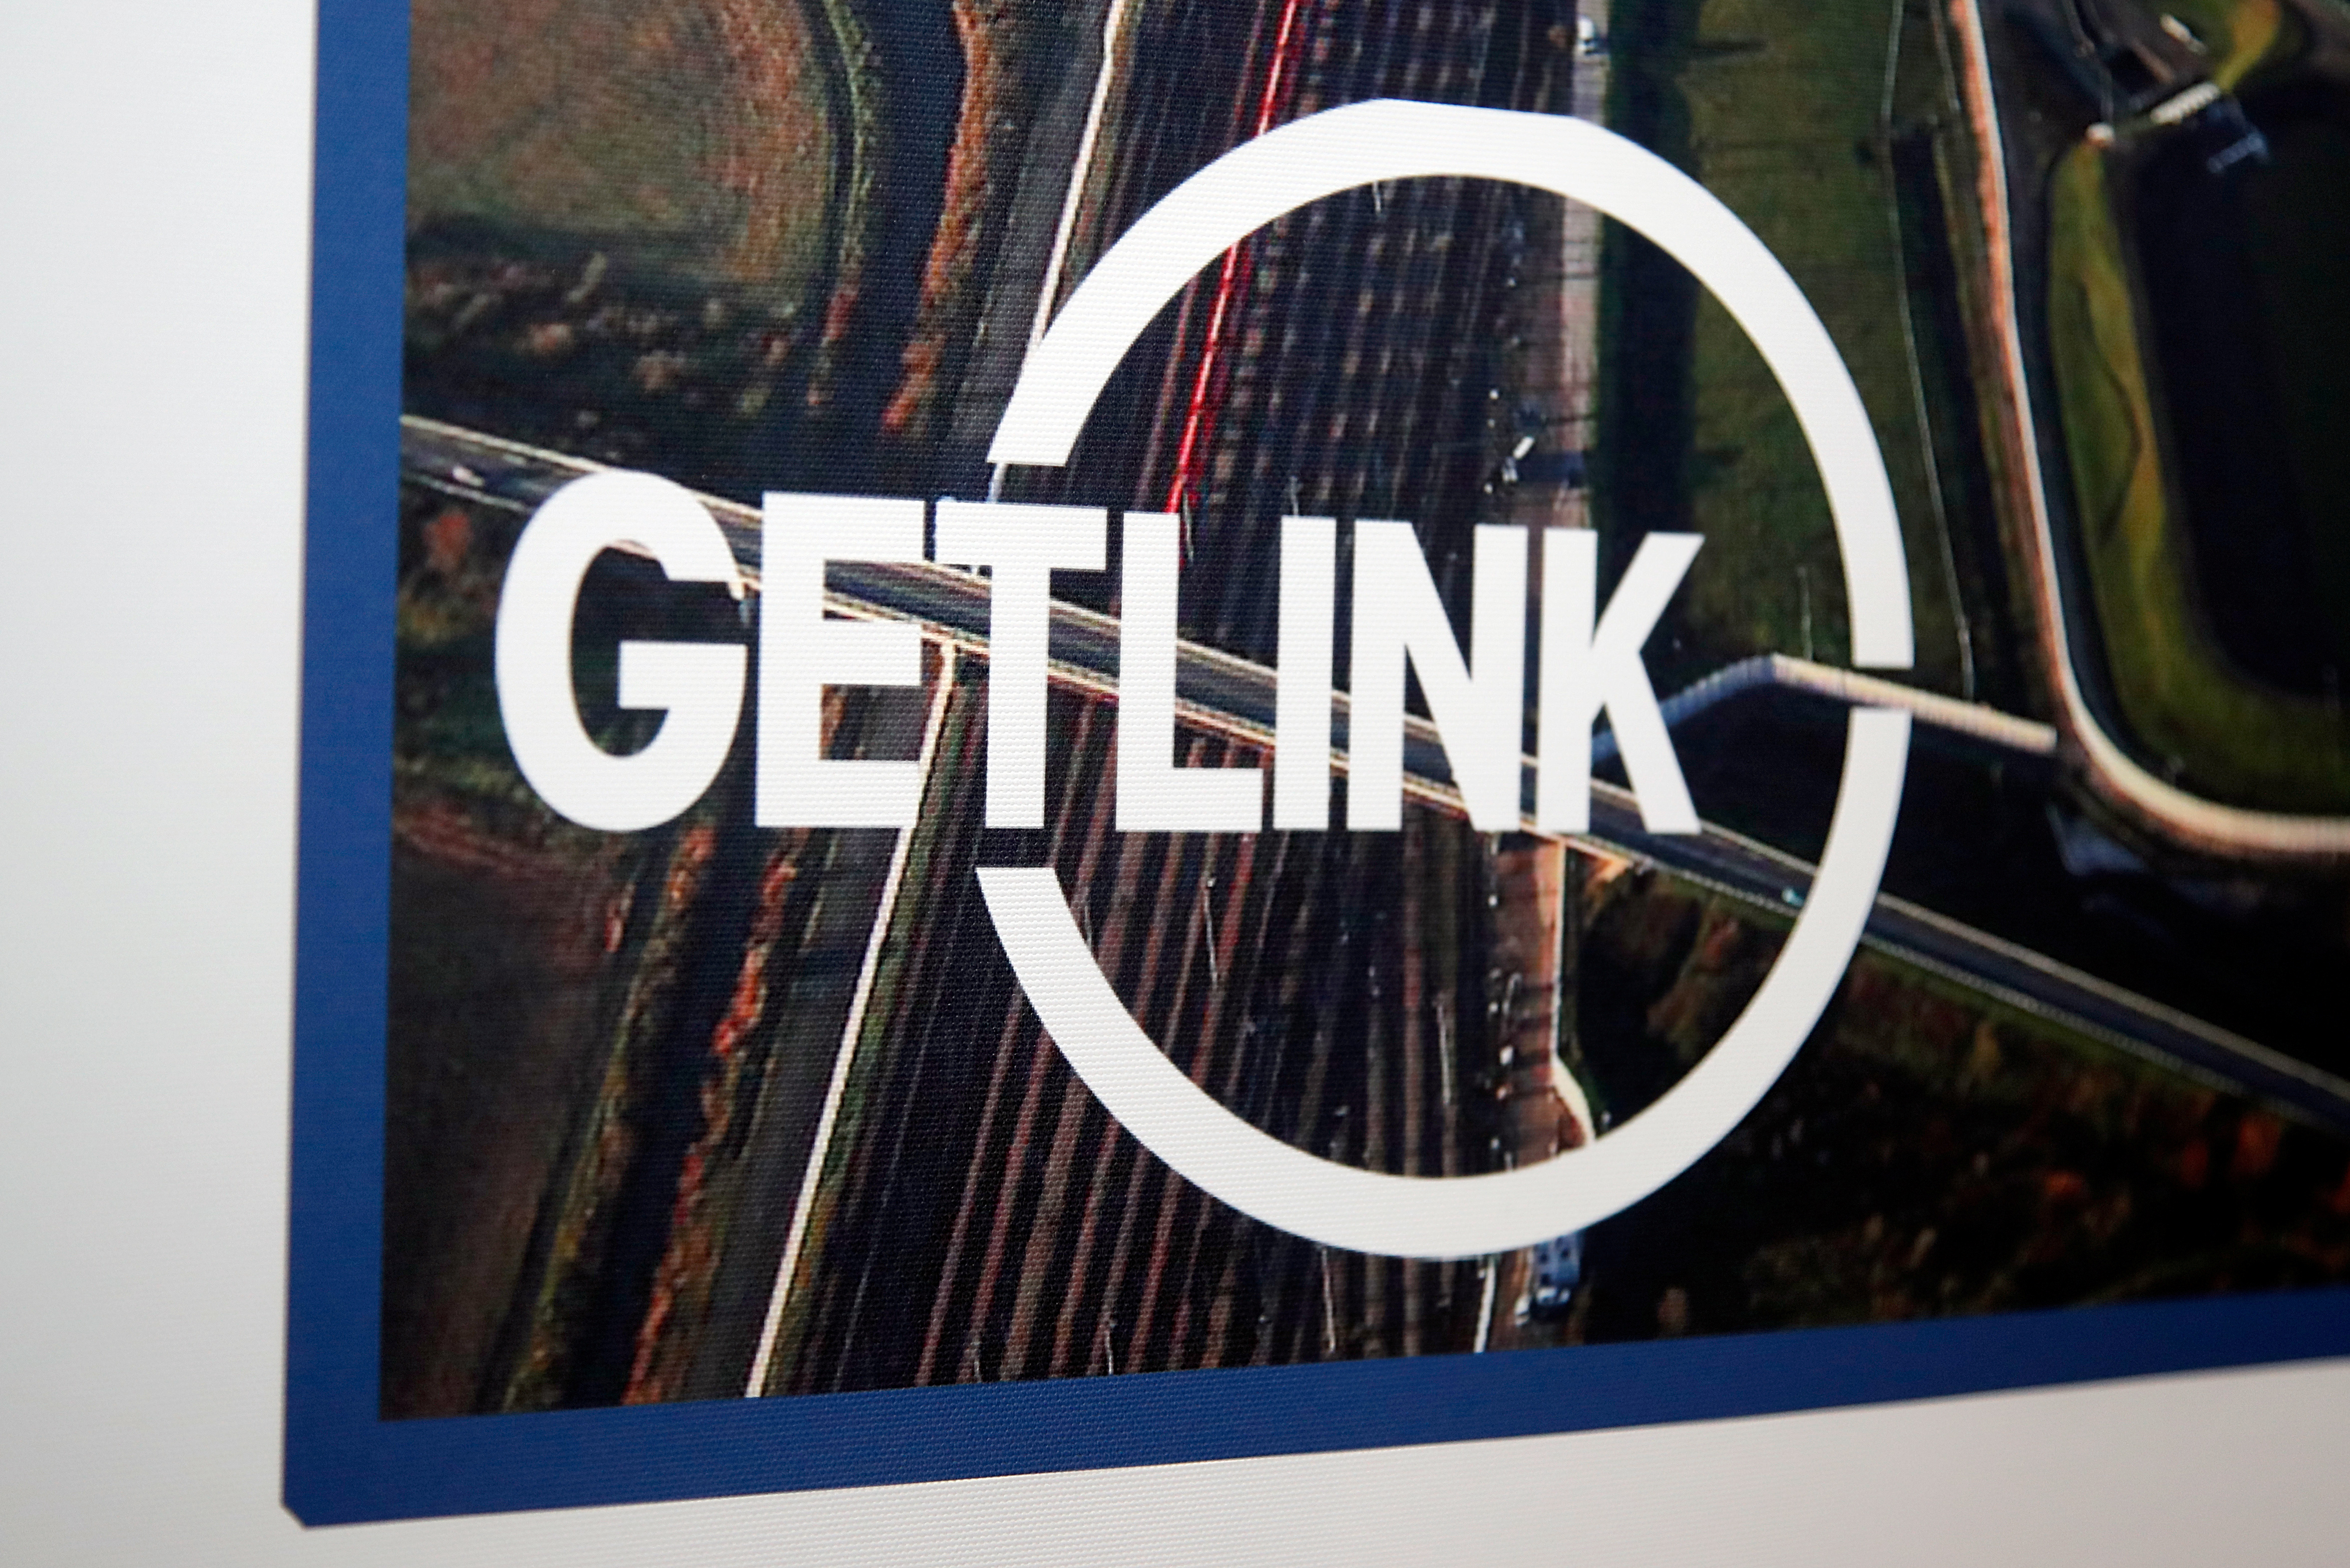 The logo of Channel tunnel operator Getlink, formerly known as Eurotunnel, is seen during the company's 2018 annual results presentation in Paris